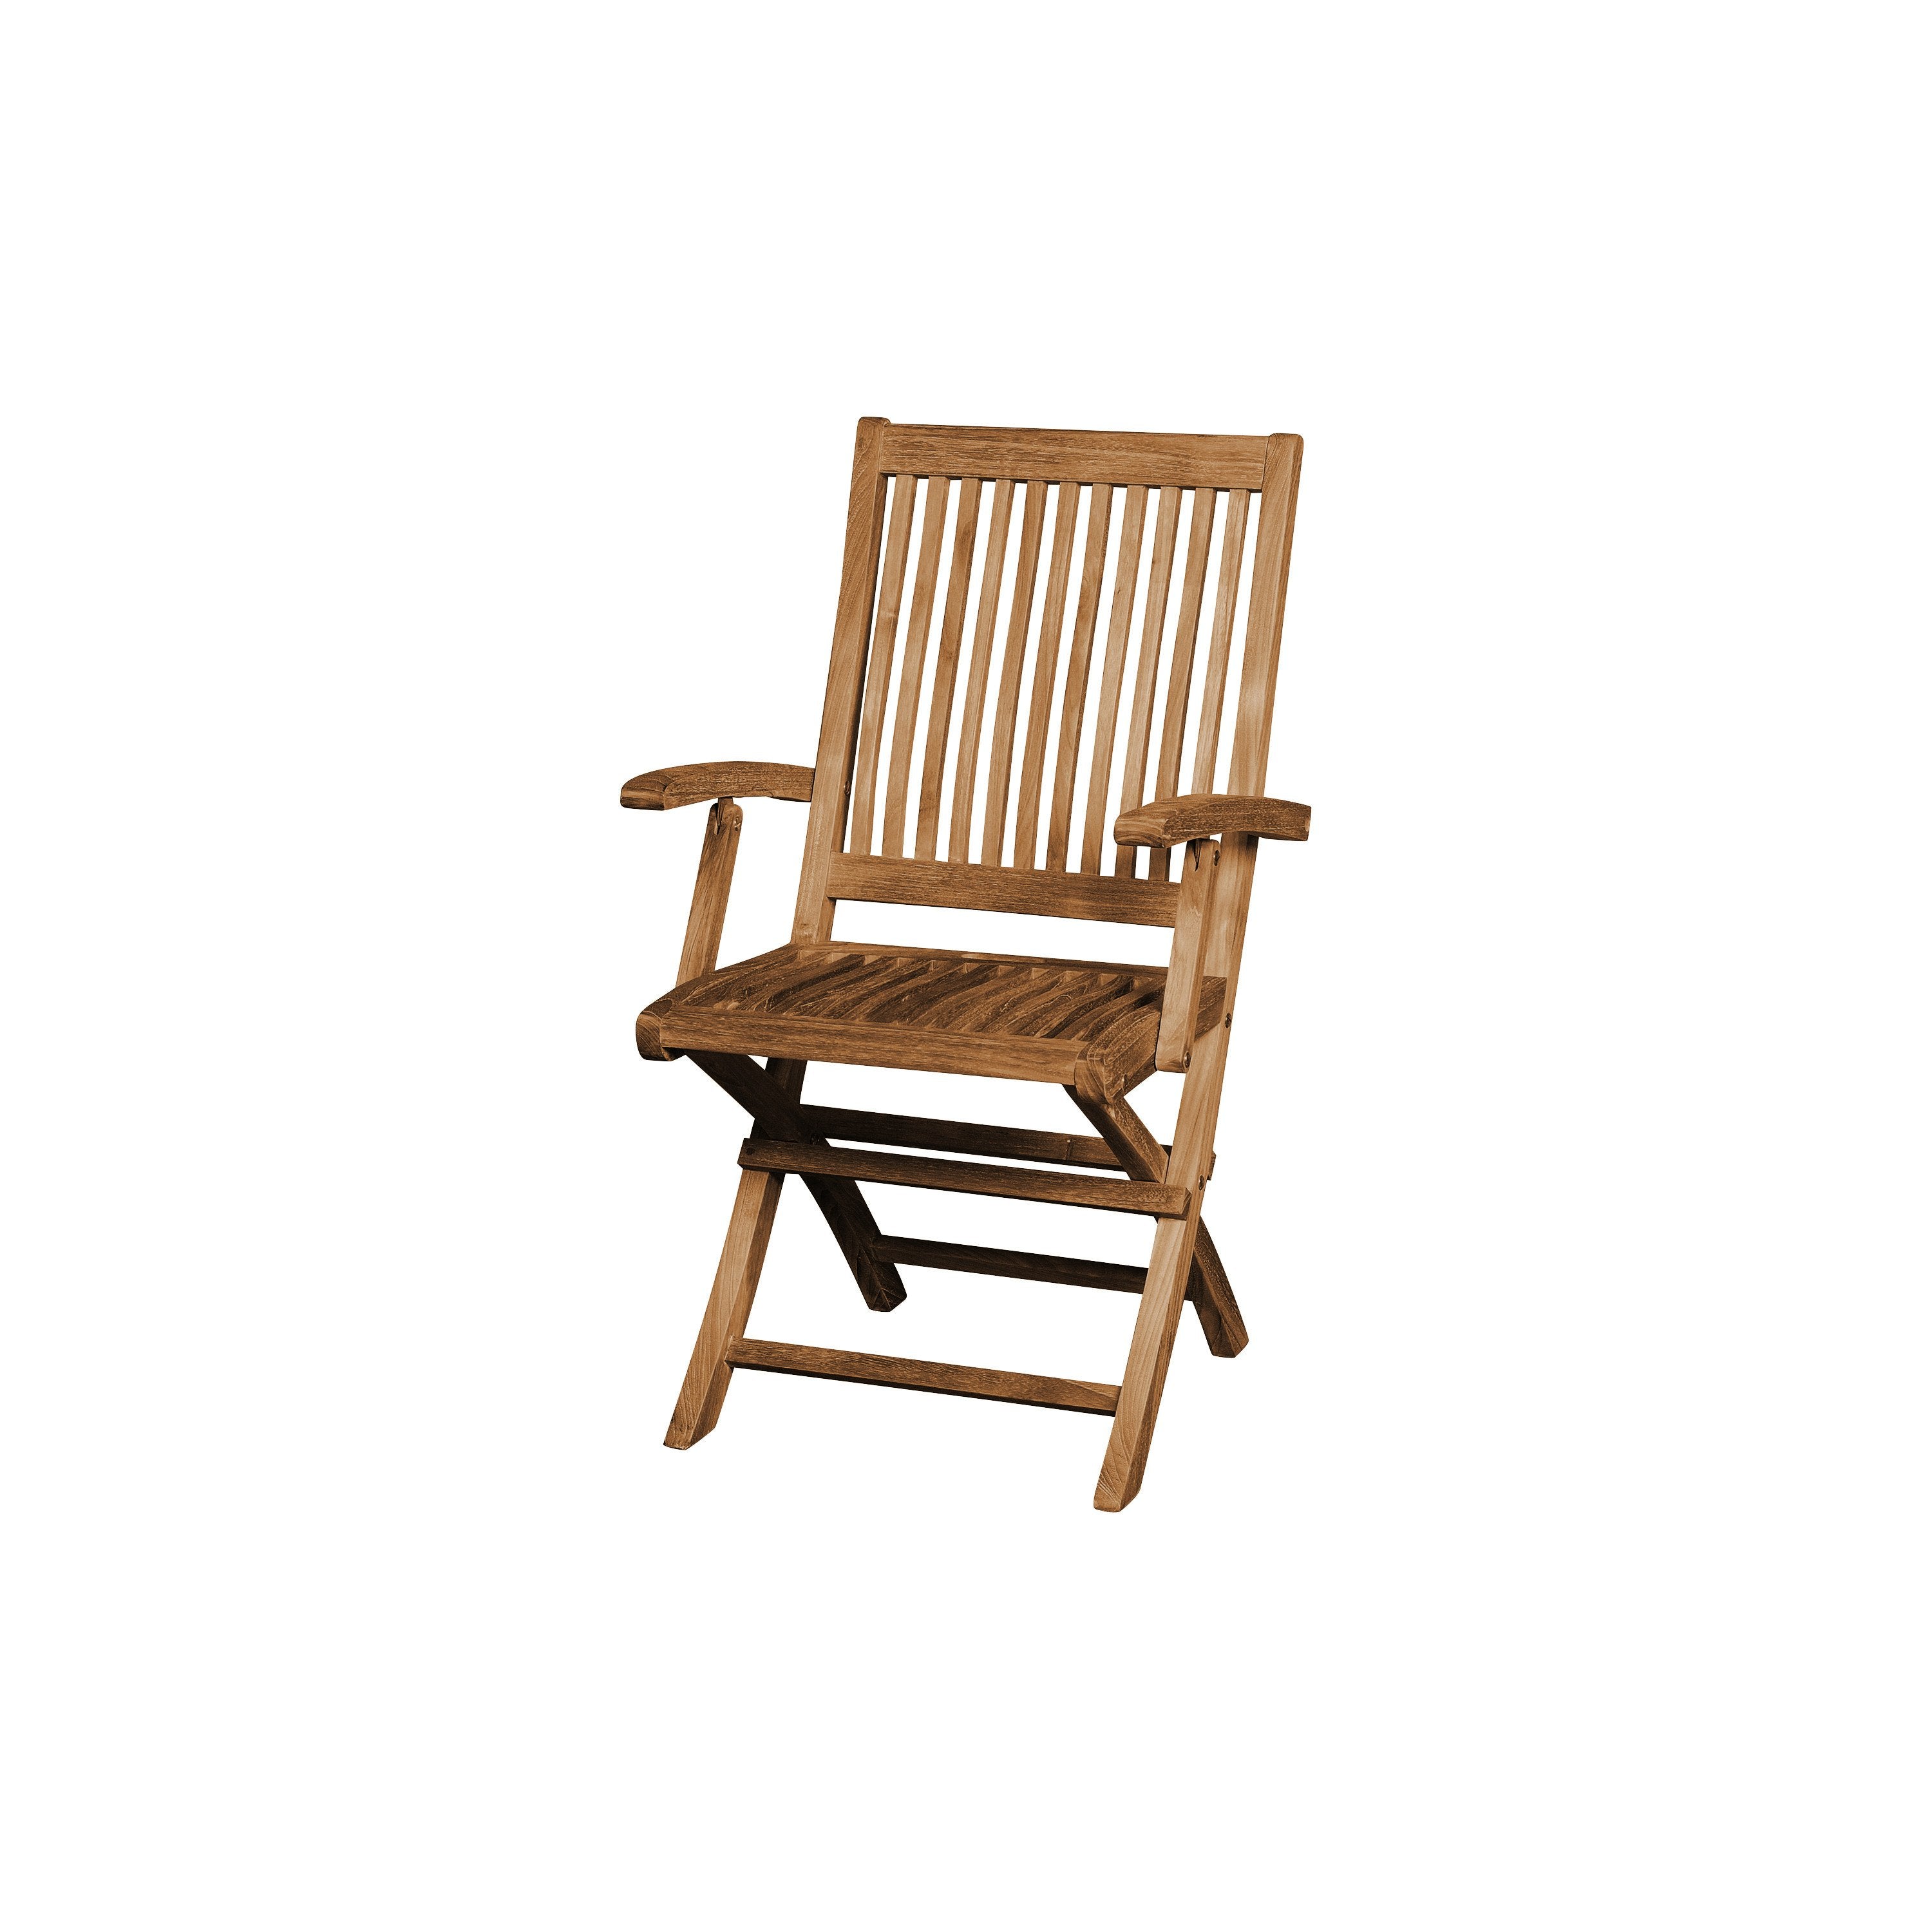 East India Madeira Folding Chair with Arms - Tucker Barbecues